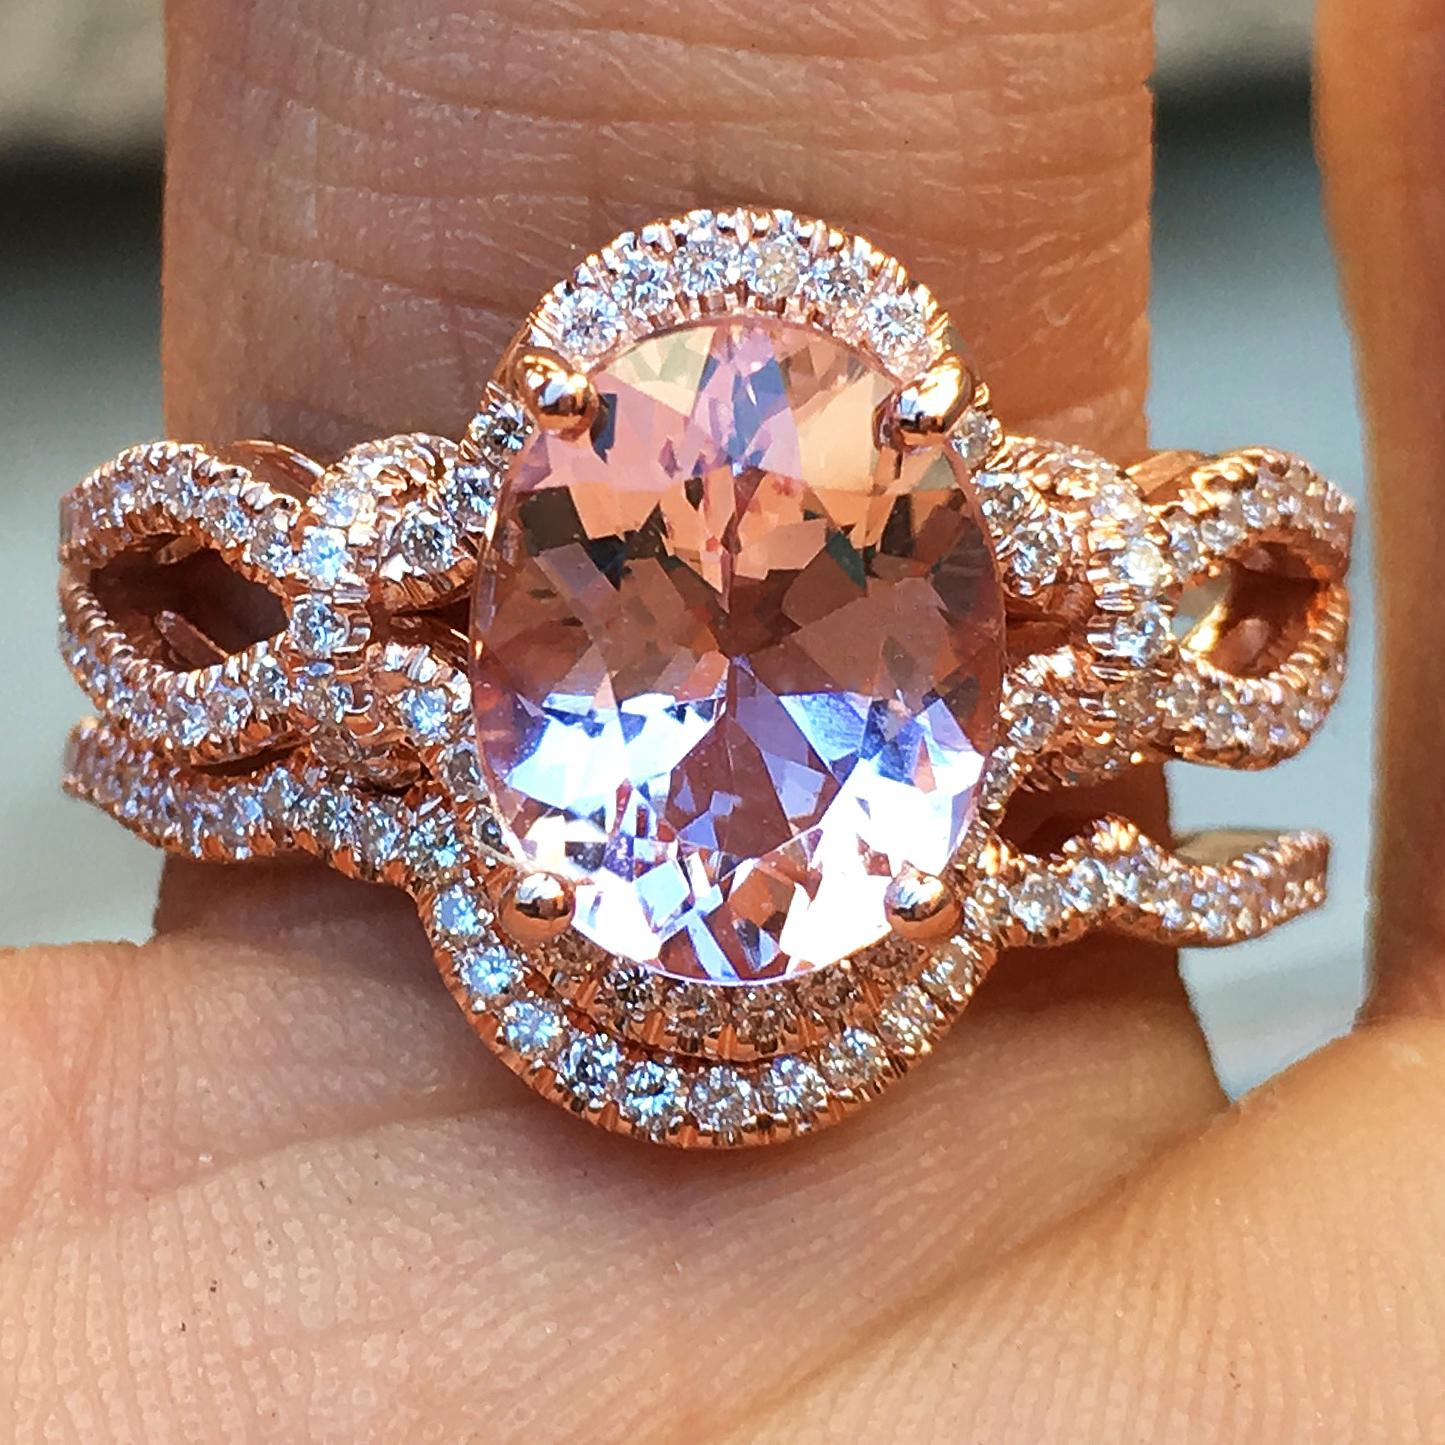 Ring will be made to order for your finger size, please allow 3-6 weeks.
Stunning 2.5+ Carat Oval Morganite set in a hand designed 14k Rose Gold.
AS013 - 0200003

Center Stone Details: 
Gem Type: Morganite
Carat weight:  2.5+
Shape: Oval
Color: